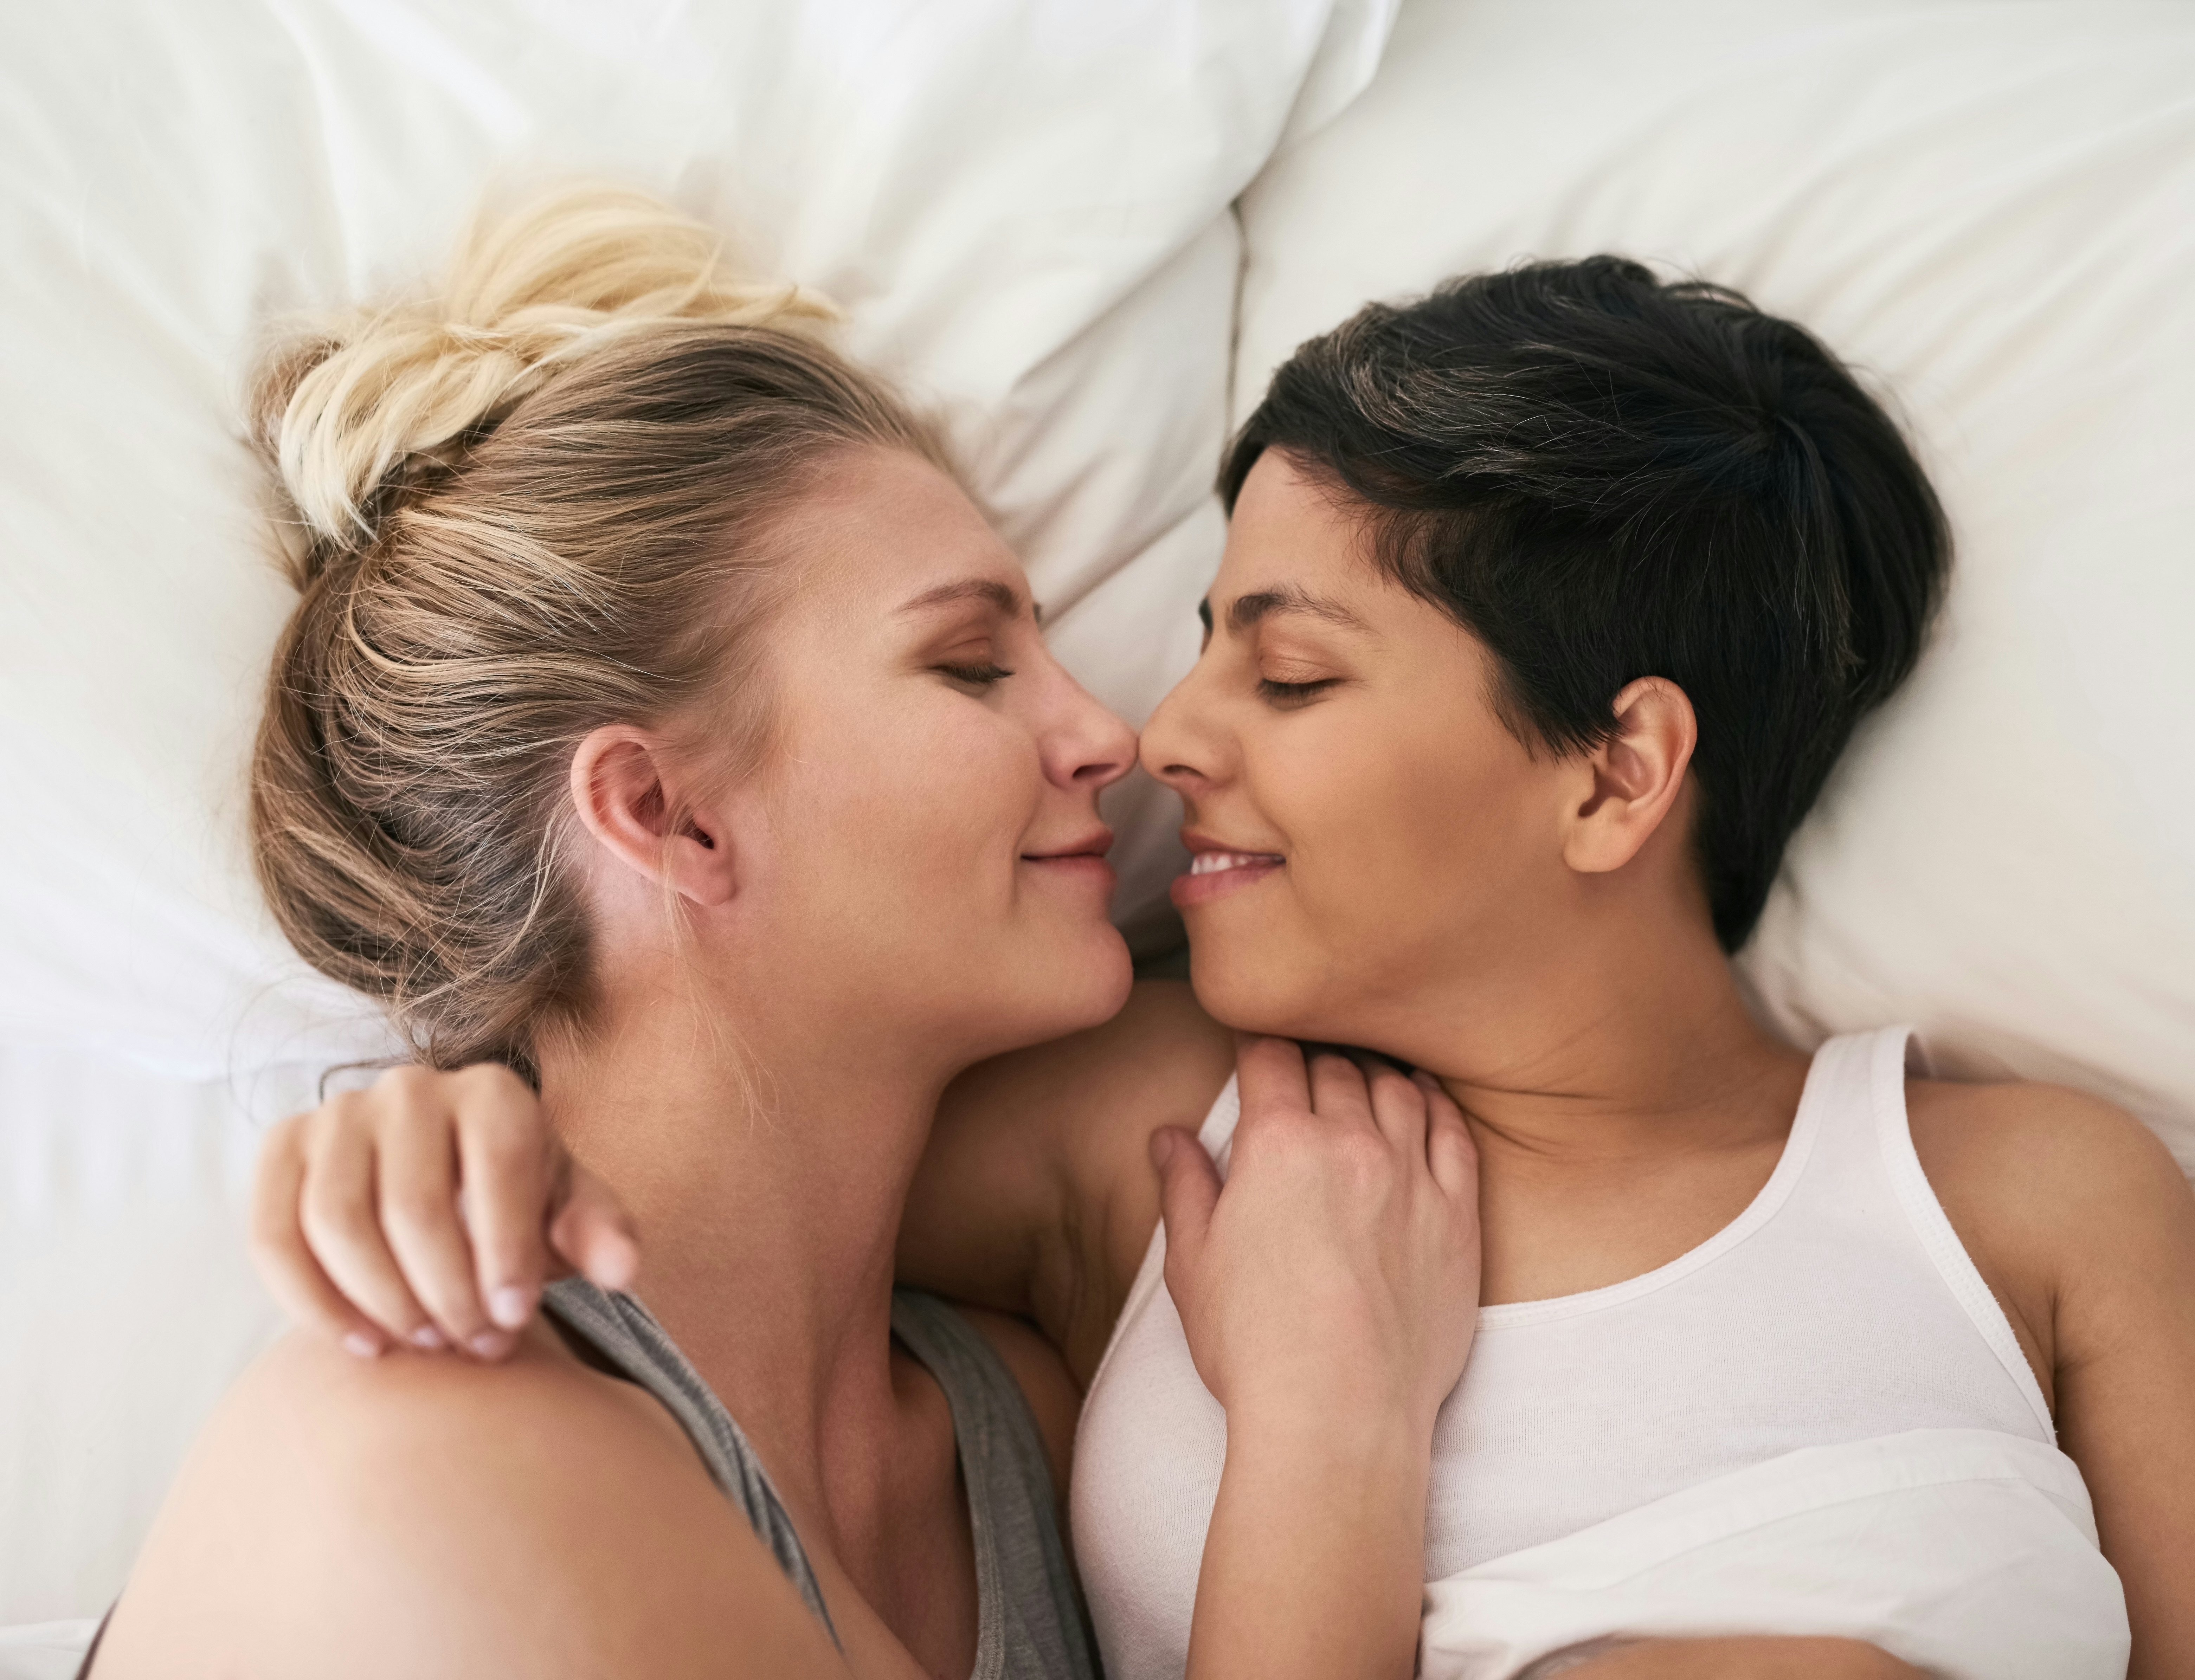 Lesbians Kissing and Pussy Caressing Pleasure in Bed